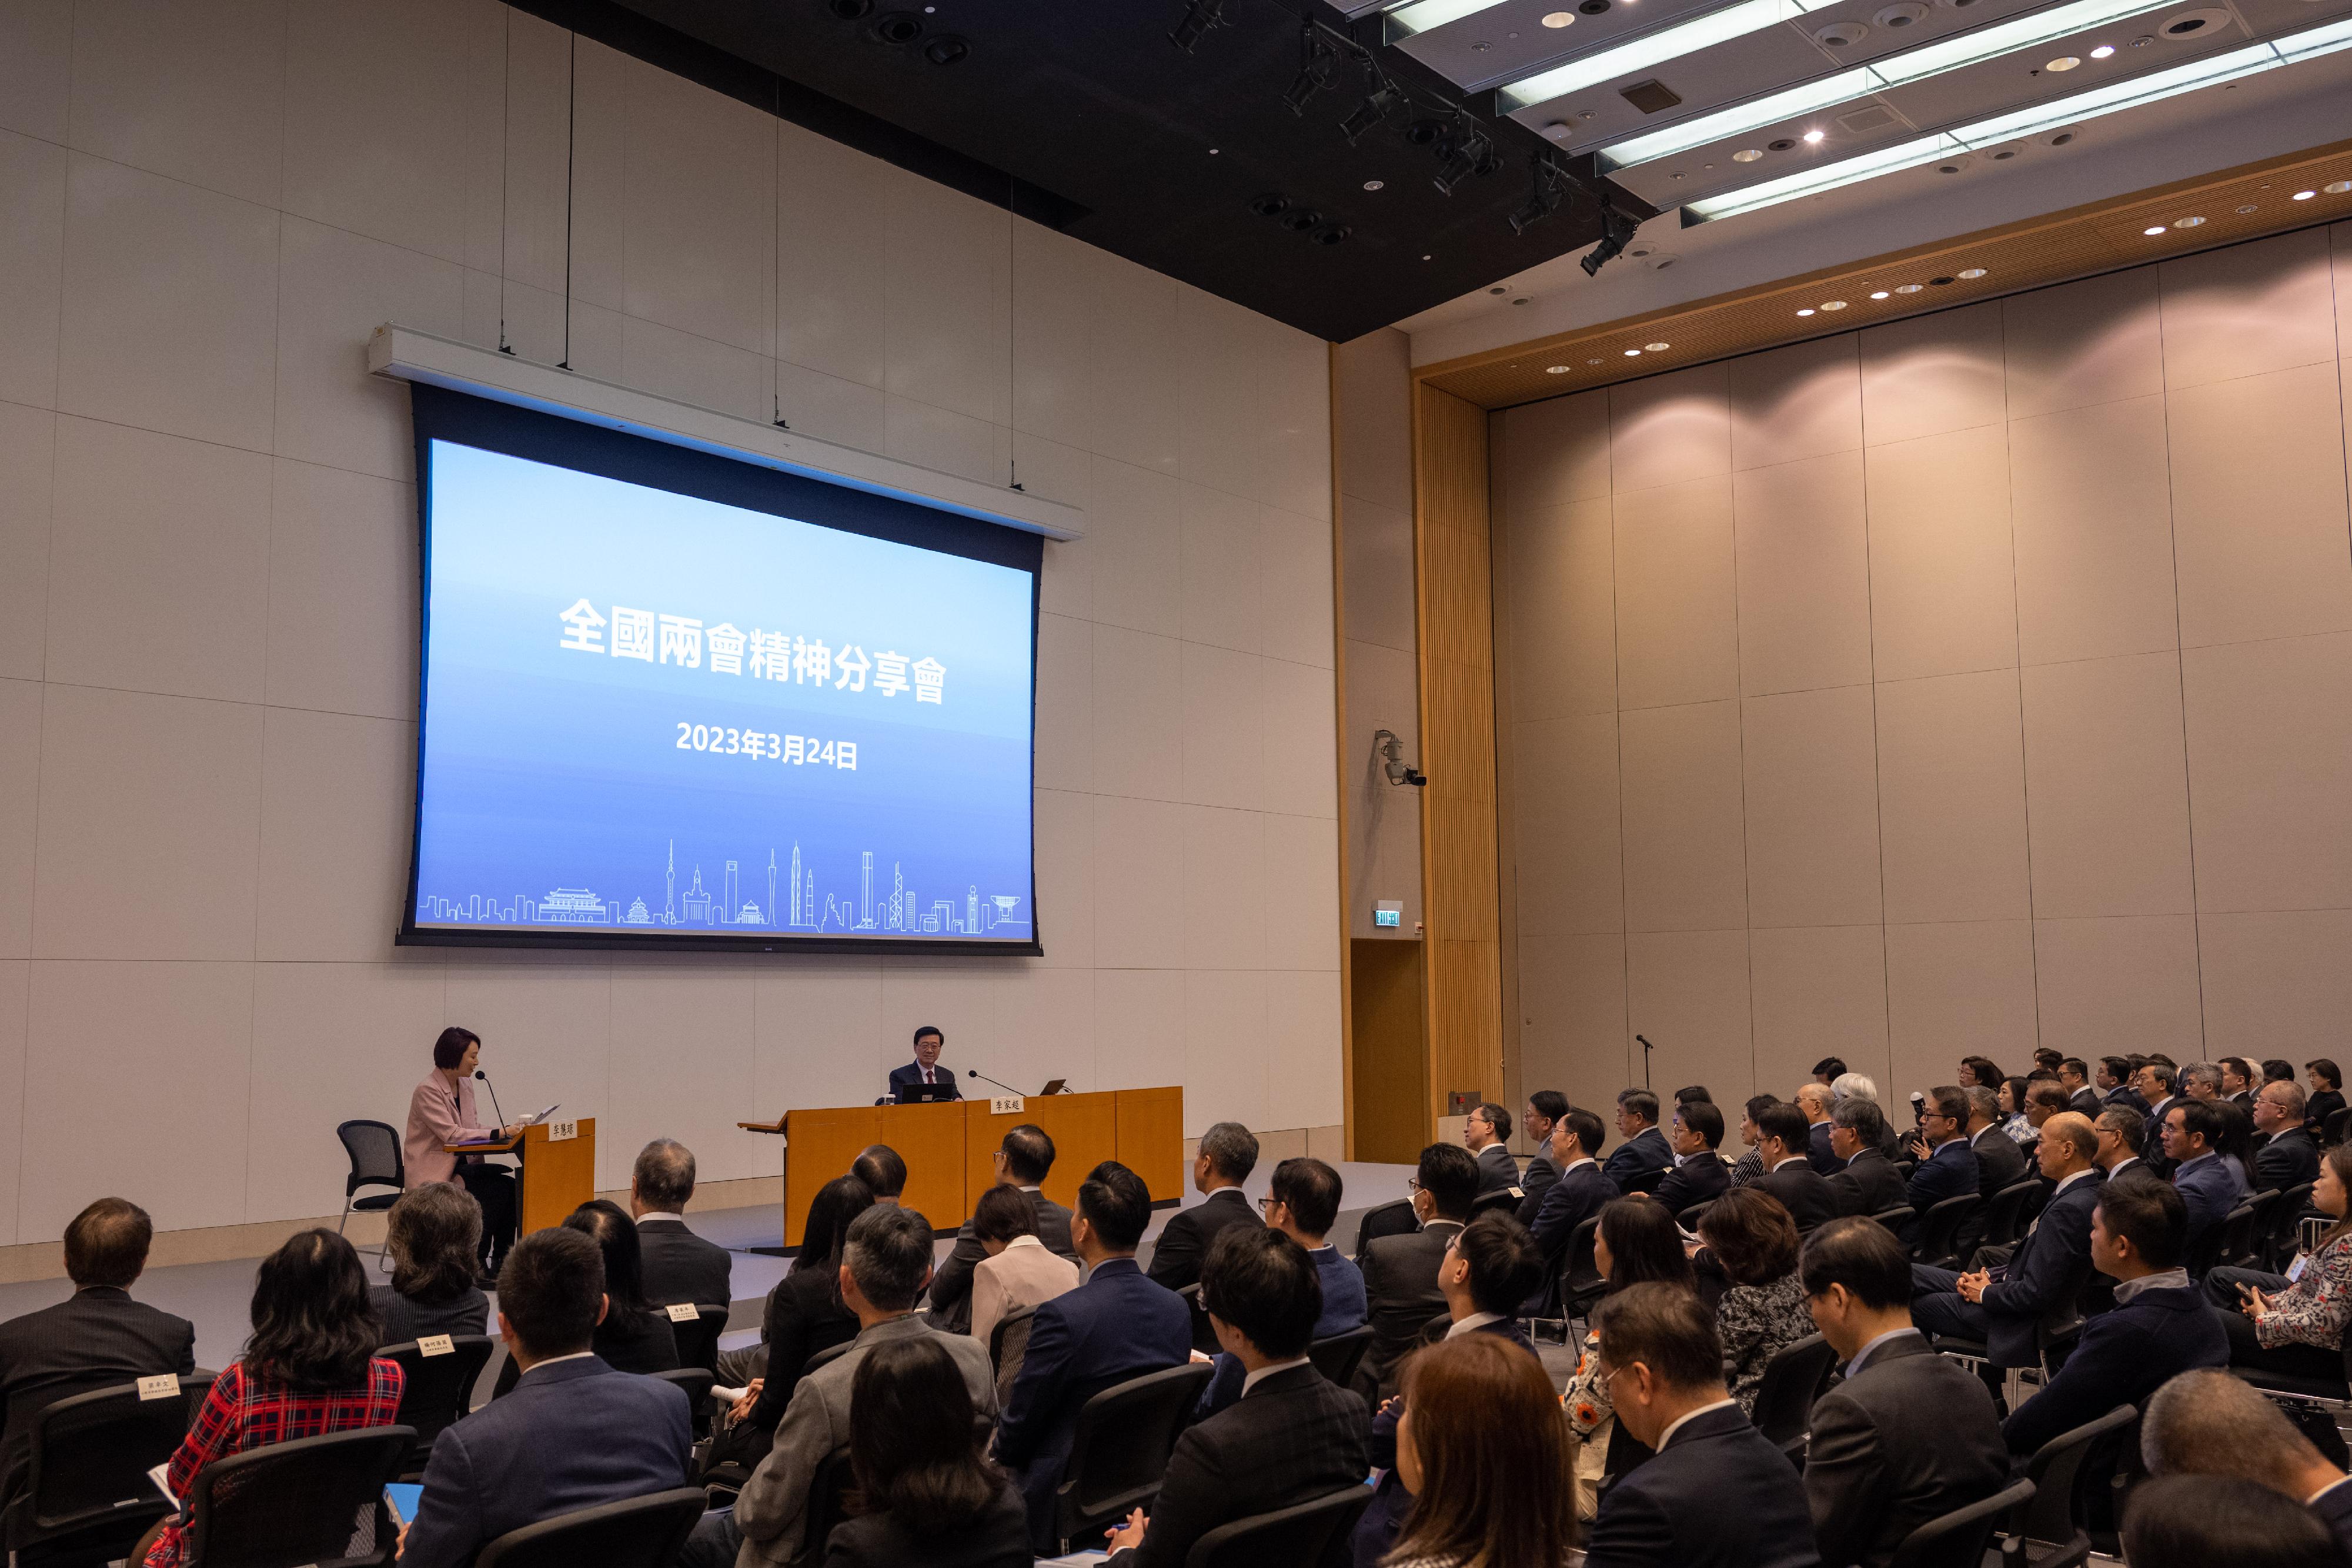 The Hong Kong Special Administrative Region Government today (March 24) held a sharing session on the spirit of "two sessions" at the Central Government Offices.